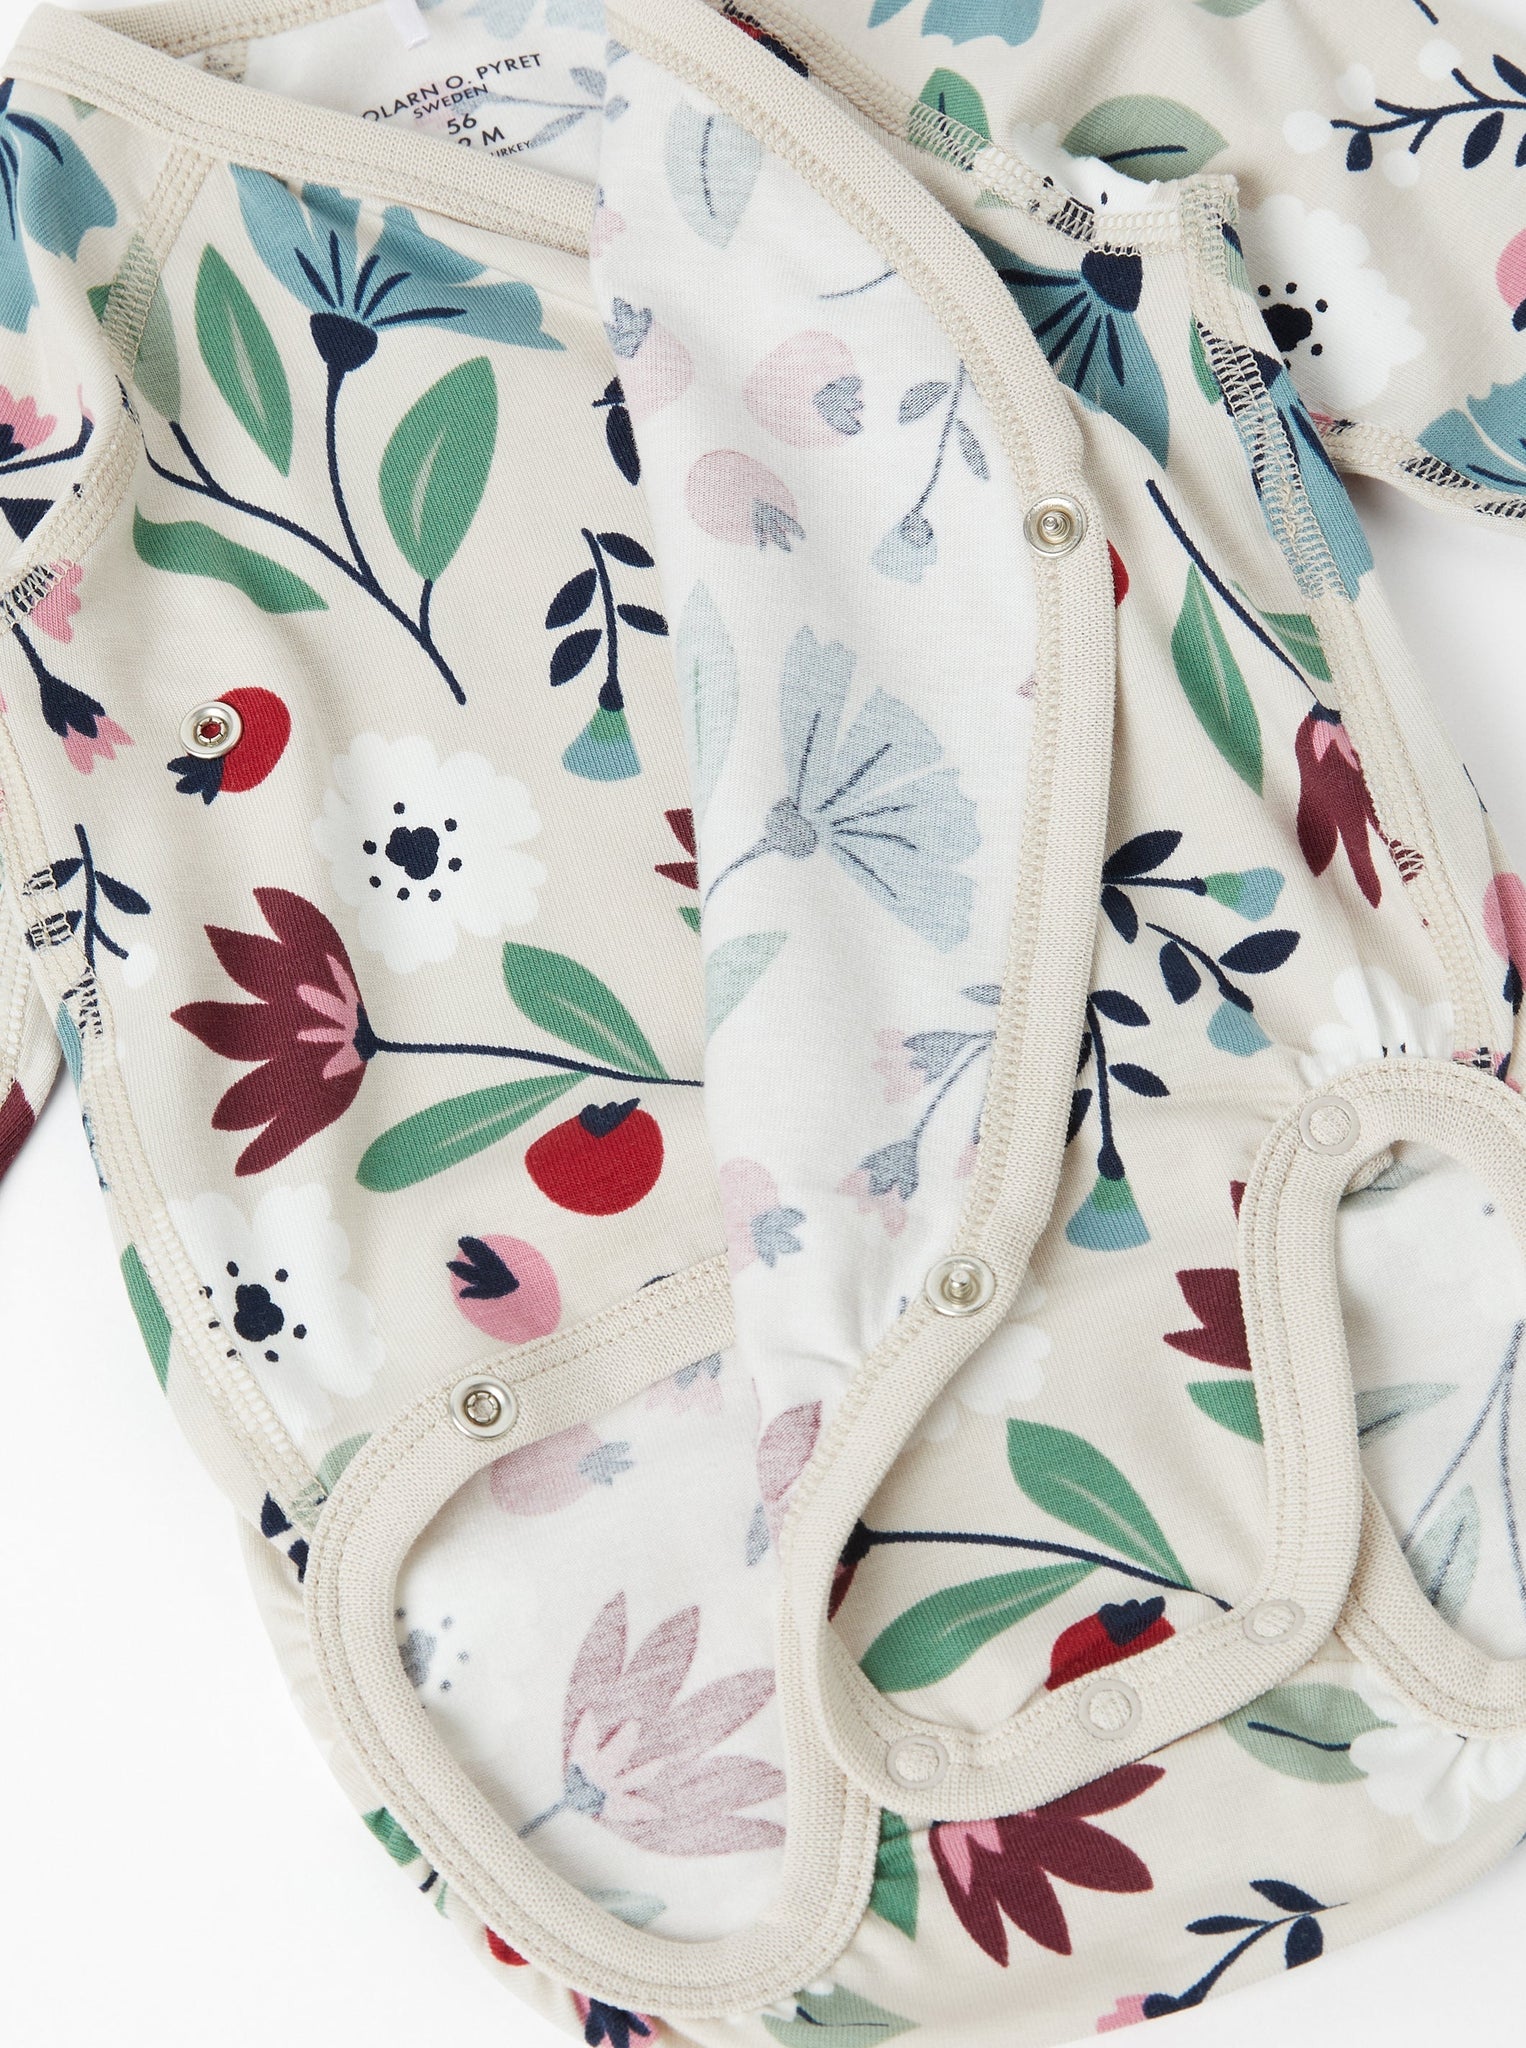 Floral Print Wraparound Babygrow from the Polarn O. Pyret baby collection. Nordic baby clothes made from sustainable sources.